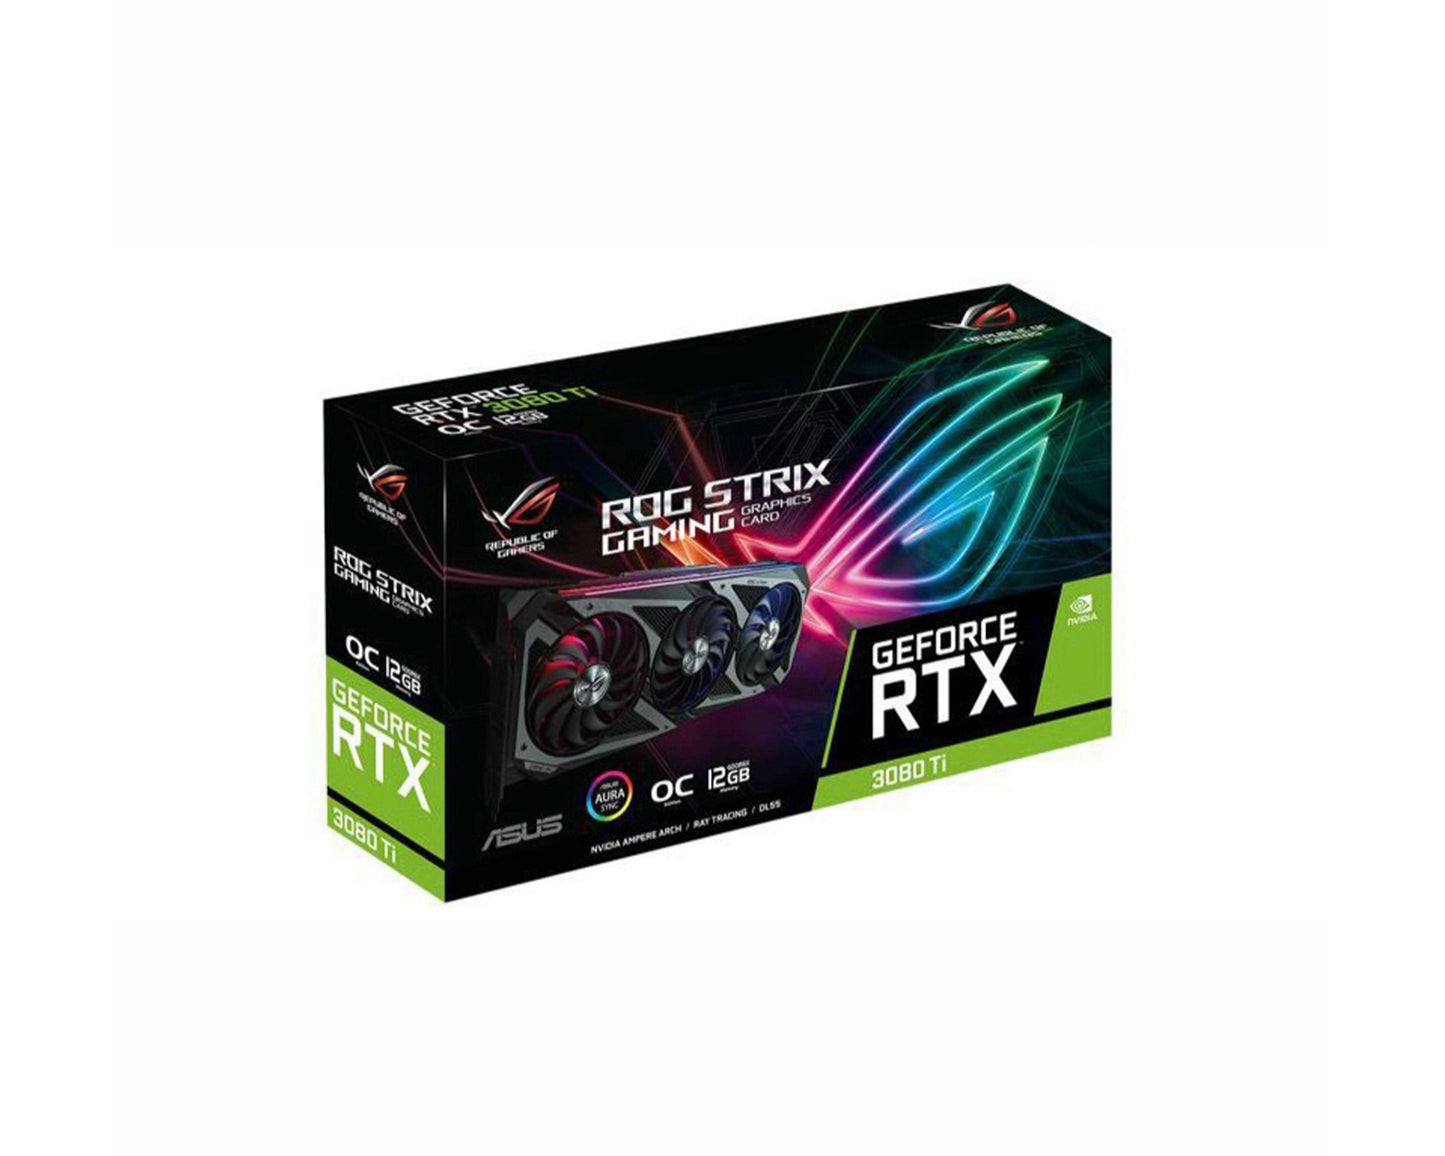 ASUS NVIDIA GeForce RTX 3080 Ti ROG Strix Overclocked Triple-Fan 12GB GDDR6X PCIe 4.0 - Only at www.BallersClubKickz.com - The ASUS ROG Strix GeForce RTX 3080 Ti OC Edition 12GB GDDR6X features three Axial-tech fans and a larger heatsink that features more fins and surface area. An aggressive ROG shroud design and AURA Sync RGB lighting ensures your card delivers maximum performance and style.